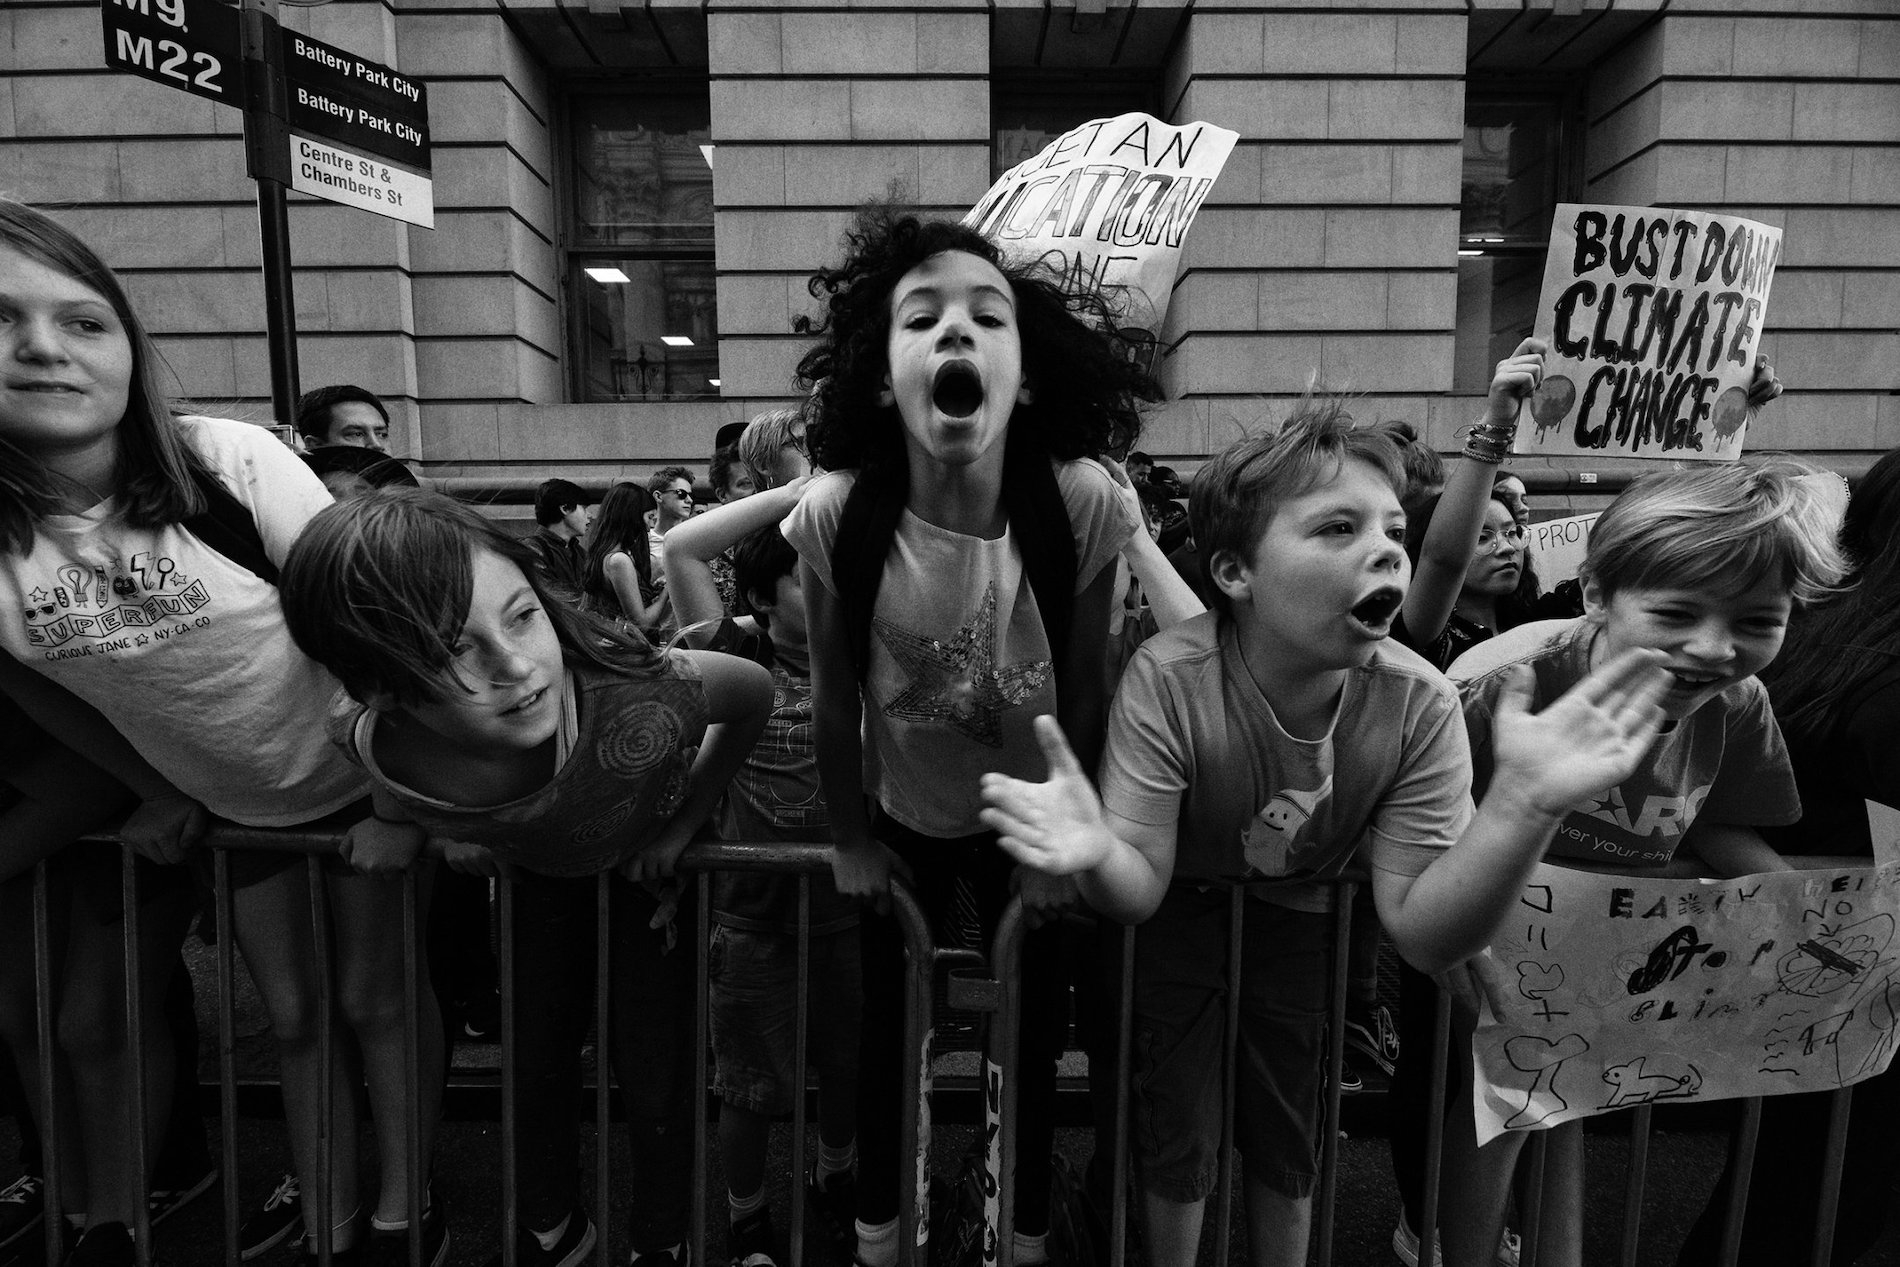 Children chant during a climate protest in New York City on Sept. 20. They were among 4 million people who joined the global climate strike that day, in what was the largest climate demonstration in human history. Dannah Gottlieb